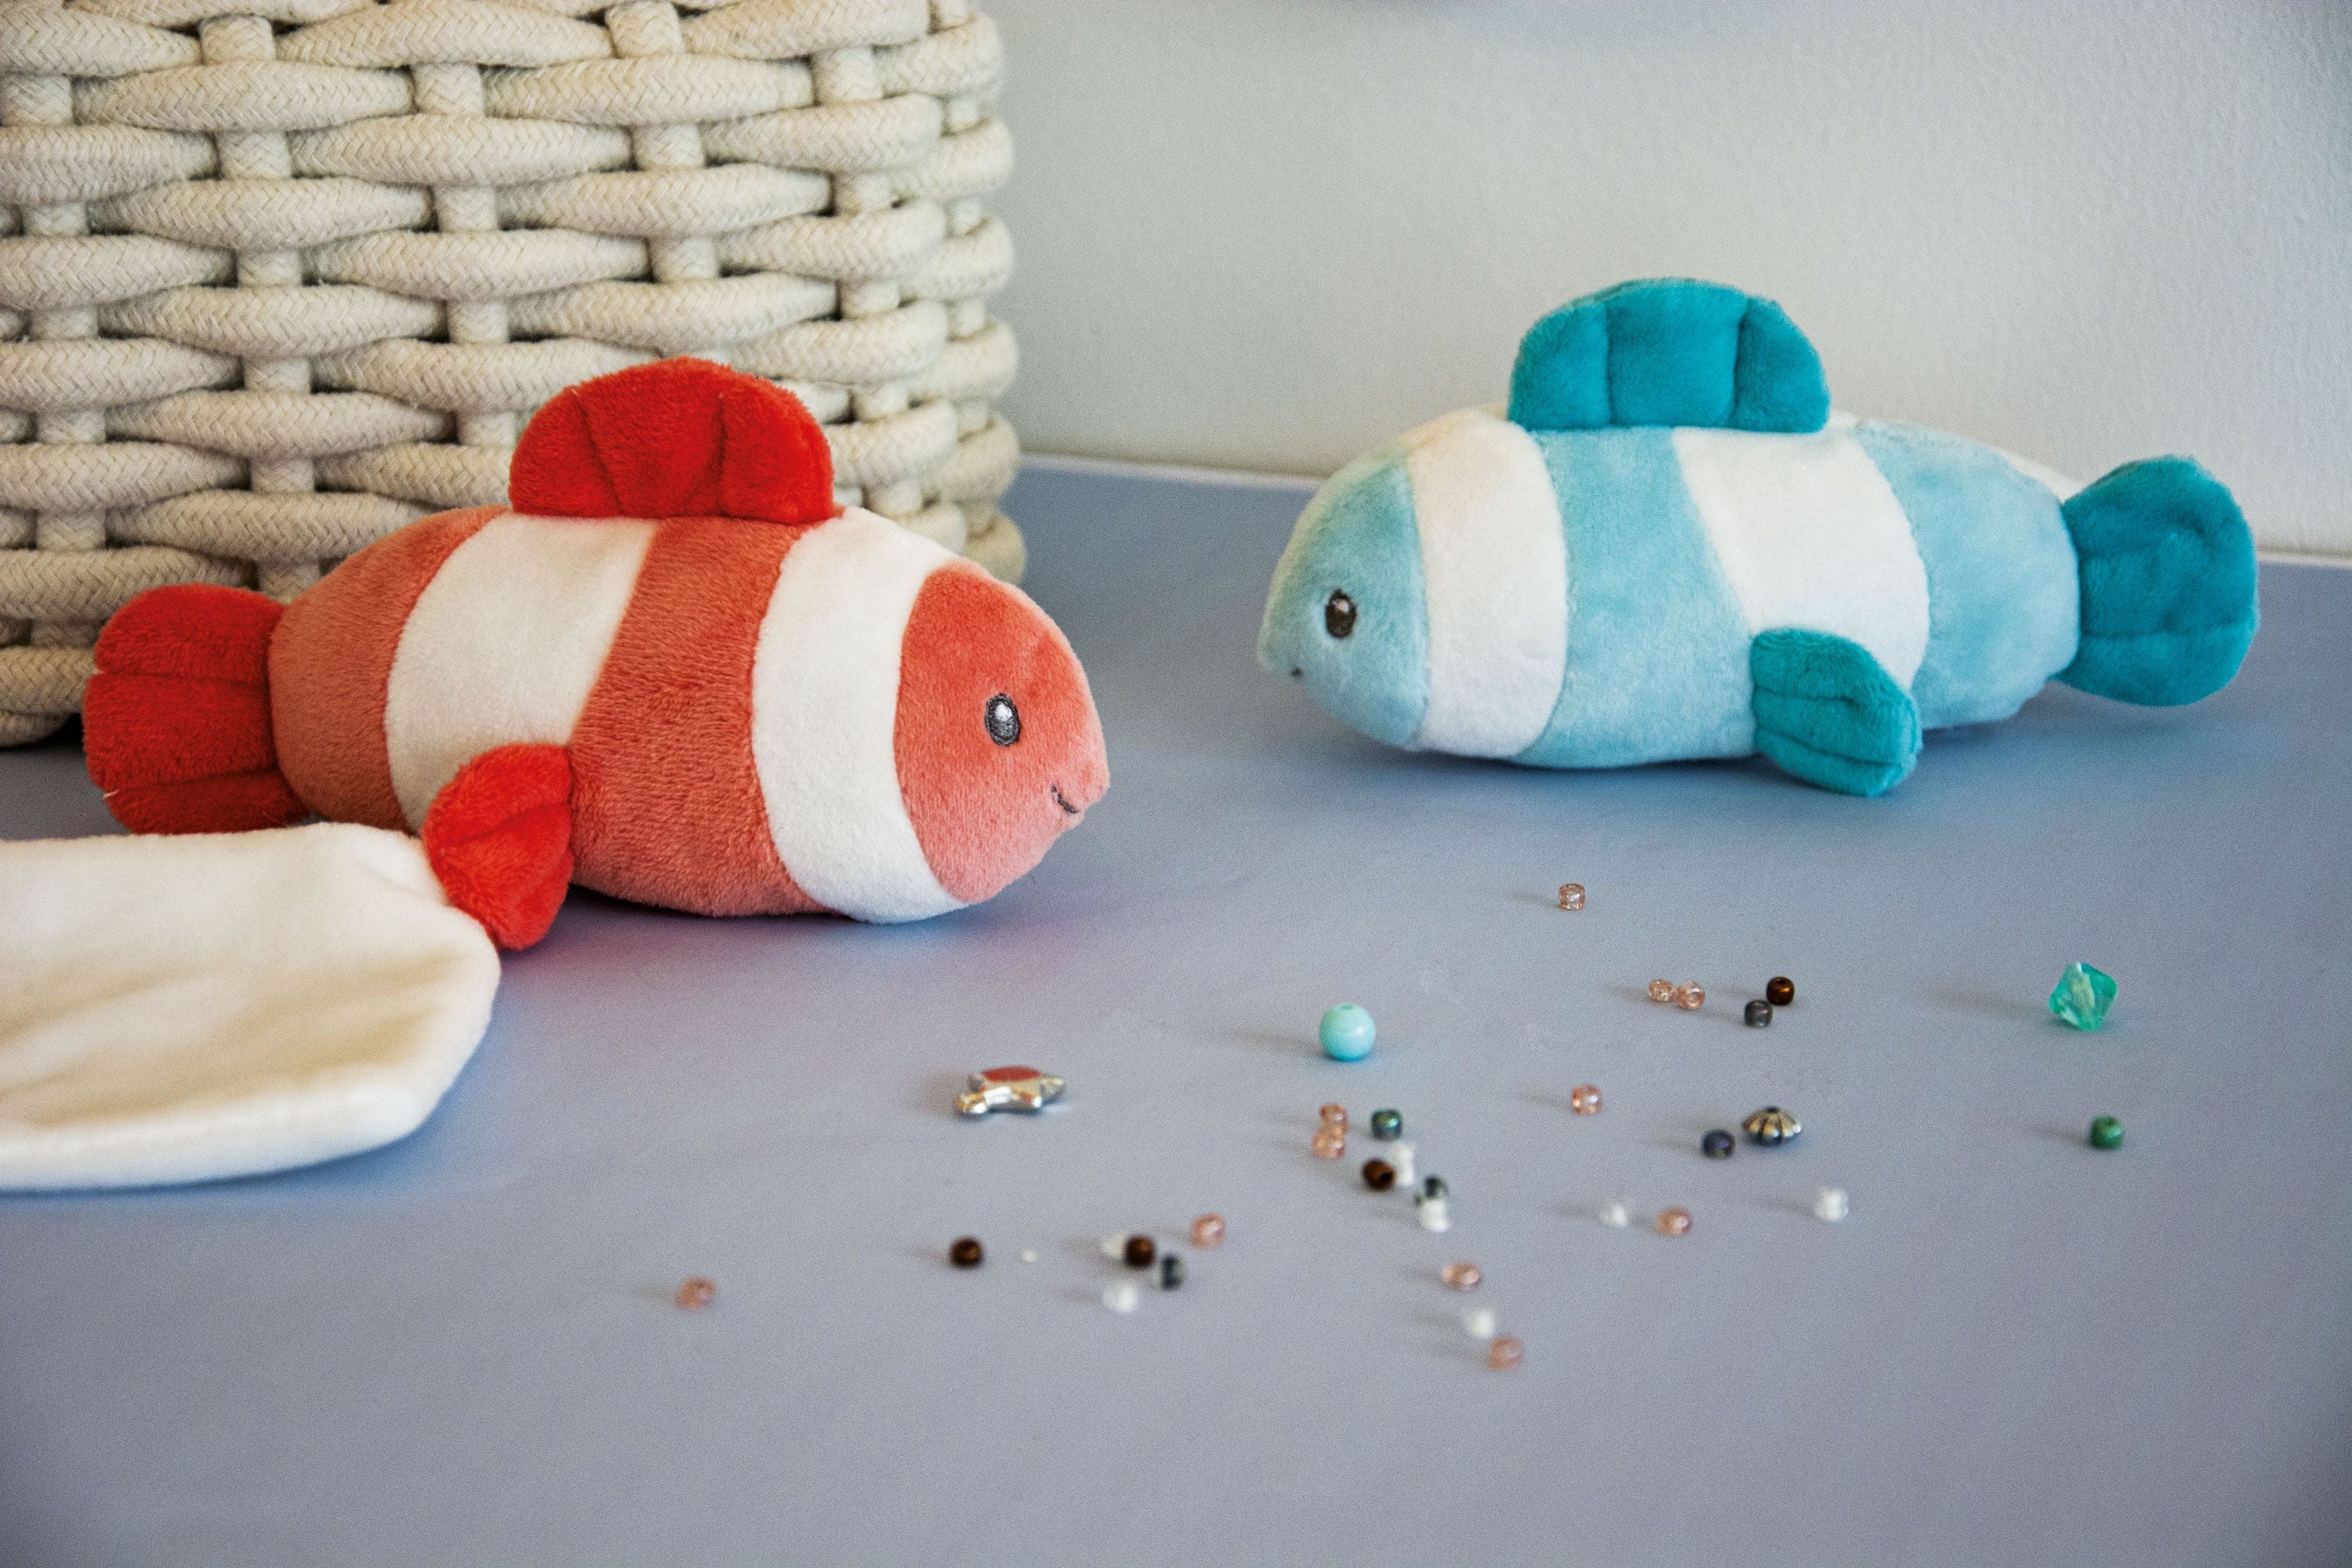 Doudou et Compagnie Under the Sea: Coral Clownfish Plush with Doudou blanket Plushies